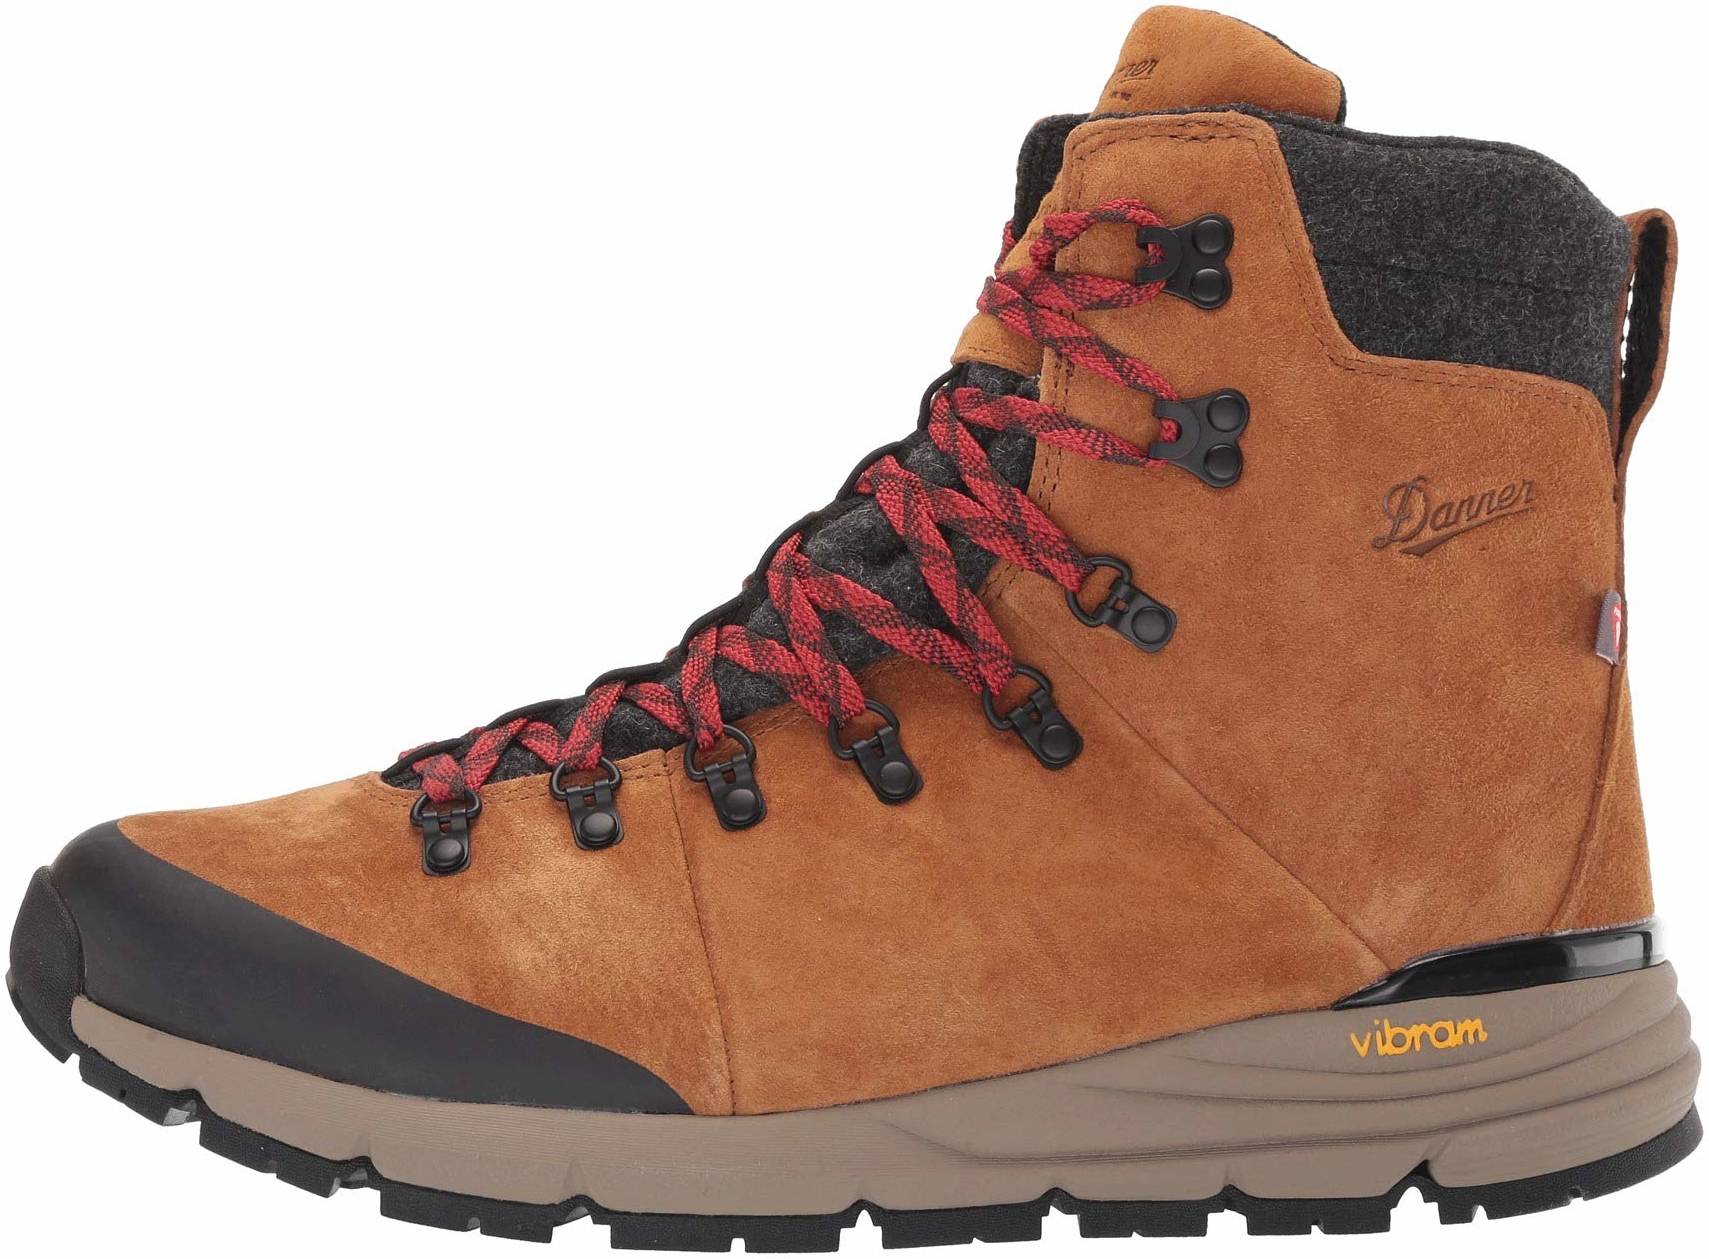 Save 29% on Danner Hiking Boots (27 